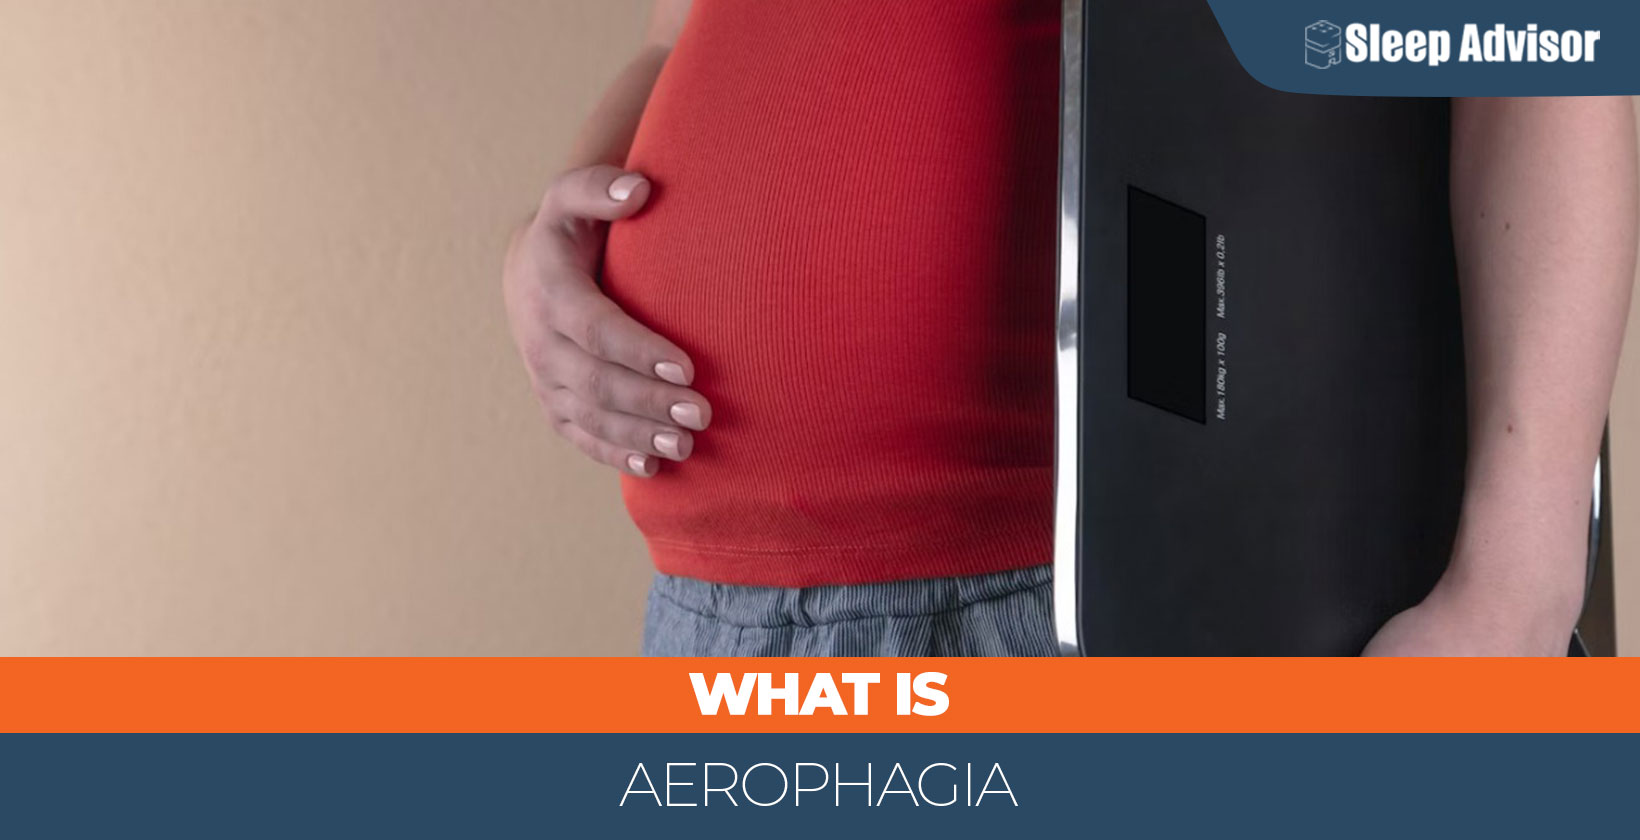 How to Tell If Farts Are Caused by CPAP Aerophagia or Digestion